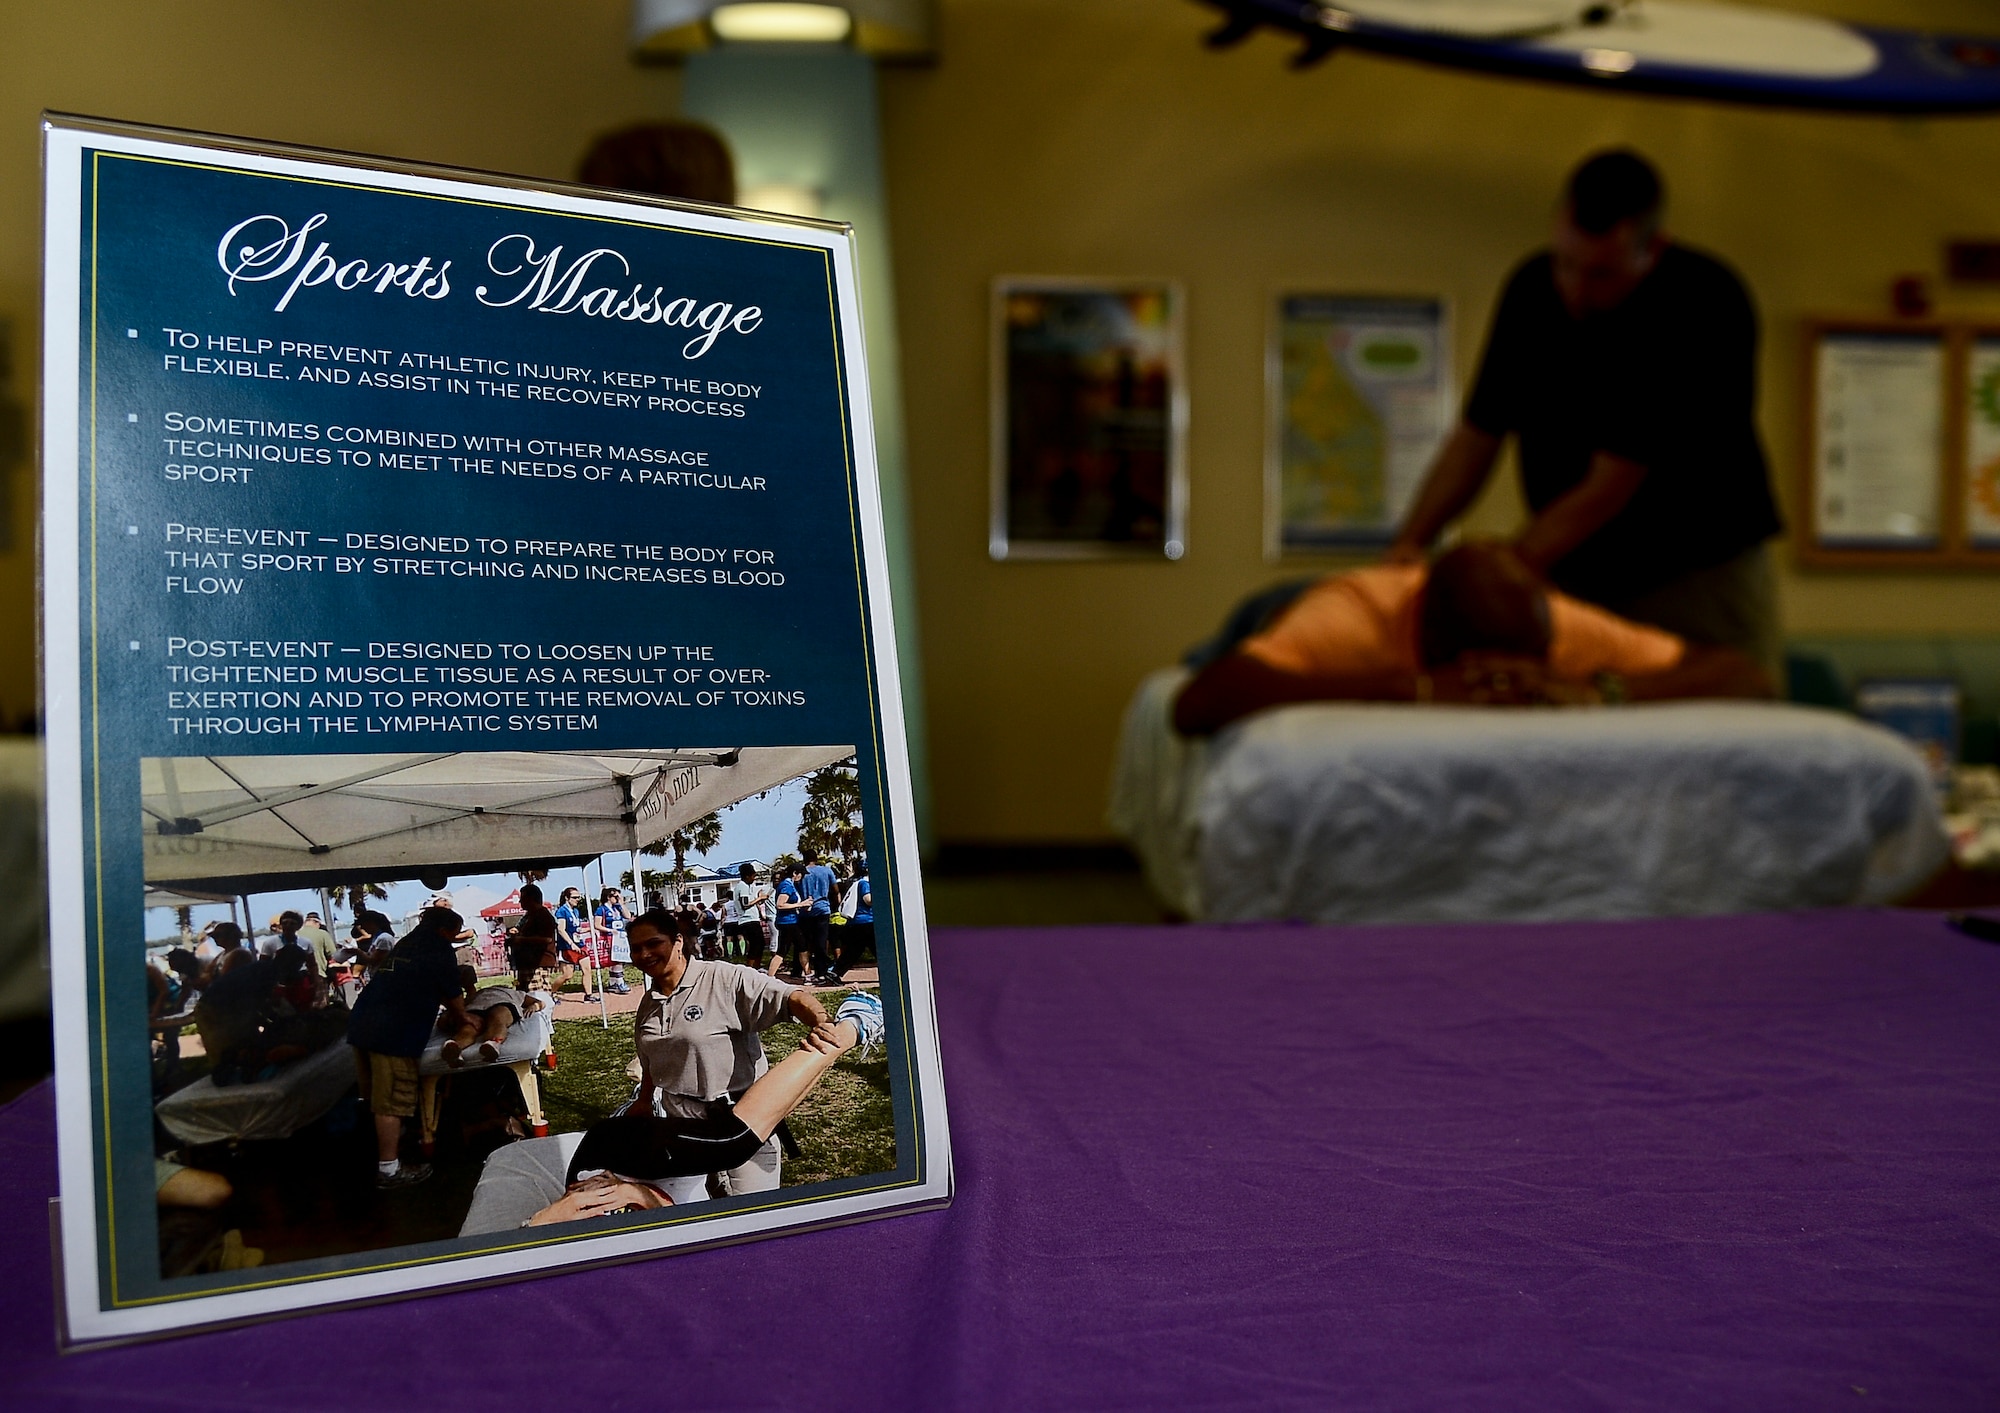 Sport massage is one of 12 specialized forms of massage therapy offered during the first annual Caring Hands Support Our Troops event at the Health and Wellness Center on MacDill Air Force Base, Fla., Oct. 25, 2013. The Caring Hands event was organized as a way to educate military members and their spouses on the different massage therapy options, and the physical and mental health advantages that are associated with each. (U.S. Air Force photo by Senior Airman Melanie Bulow-Kelly/Released)